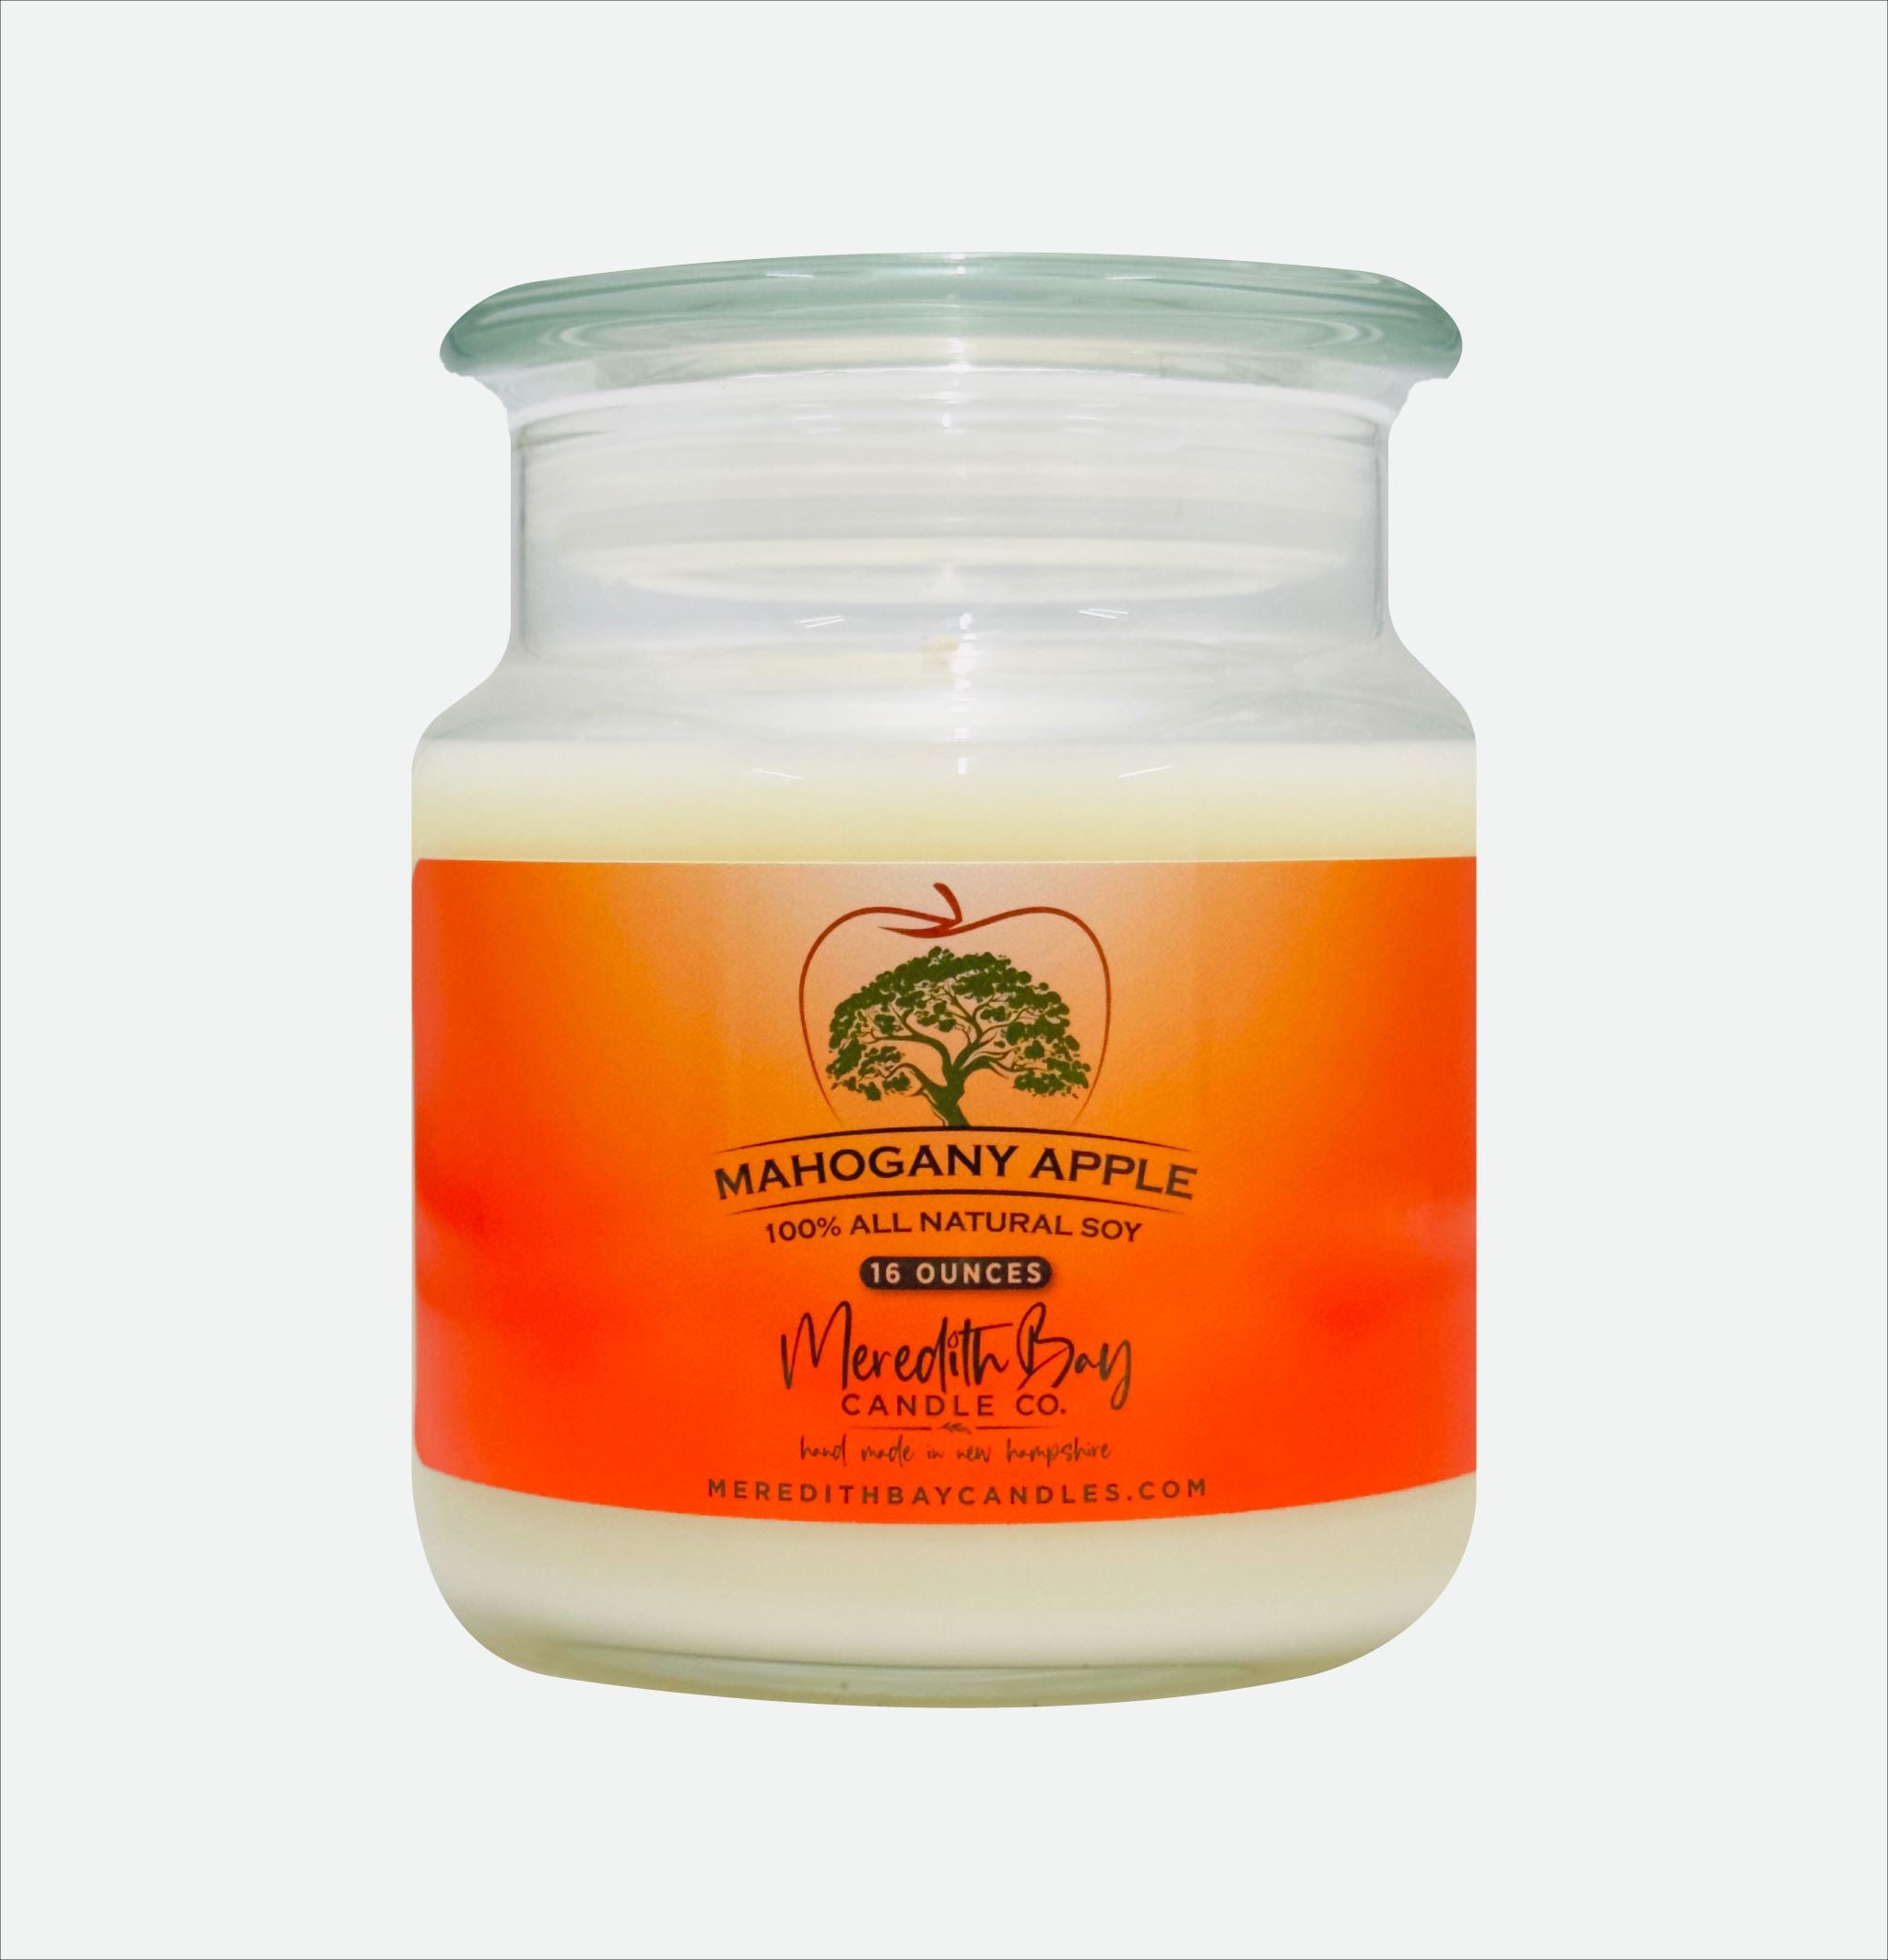 Mahogany Apple Soy Candle Meredith Bay Candle Co 16 Oz 